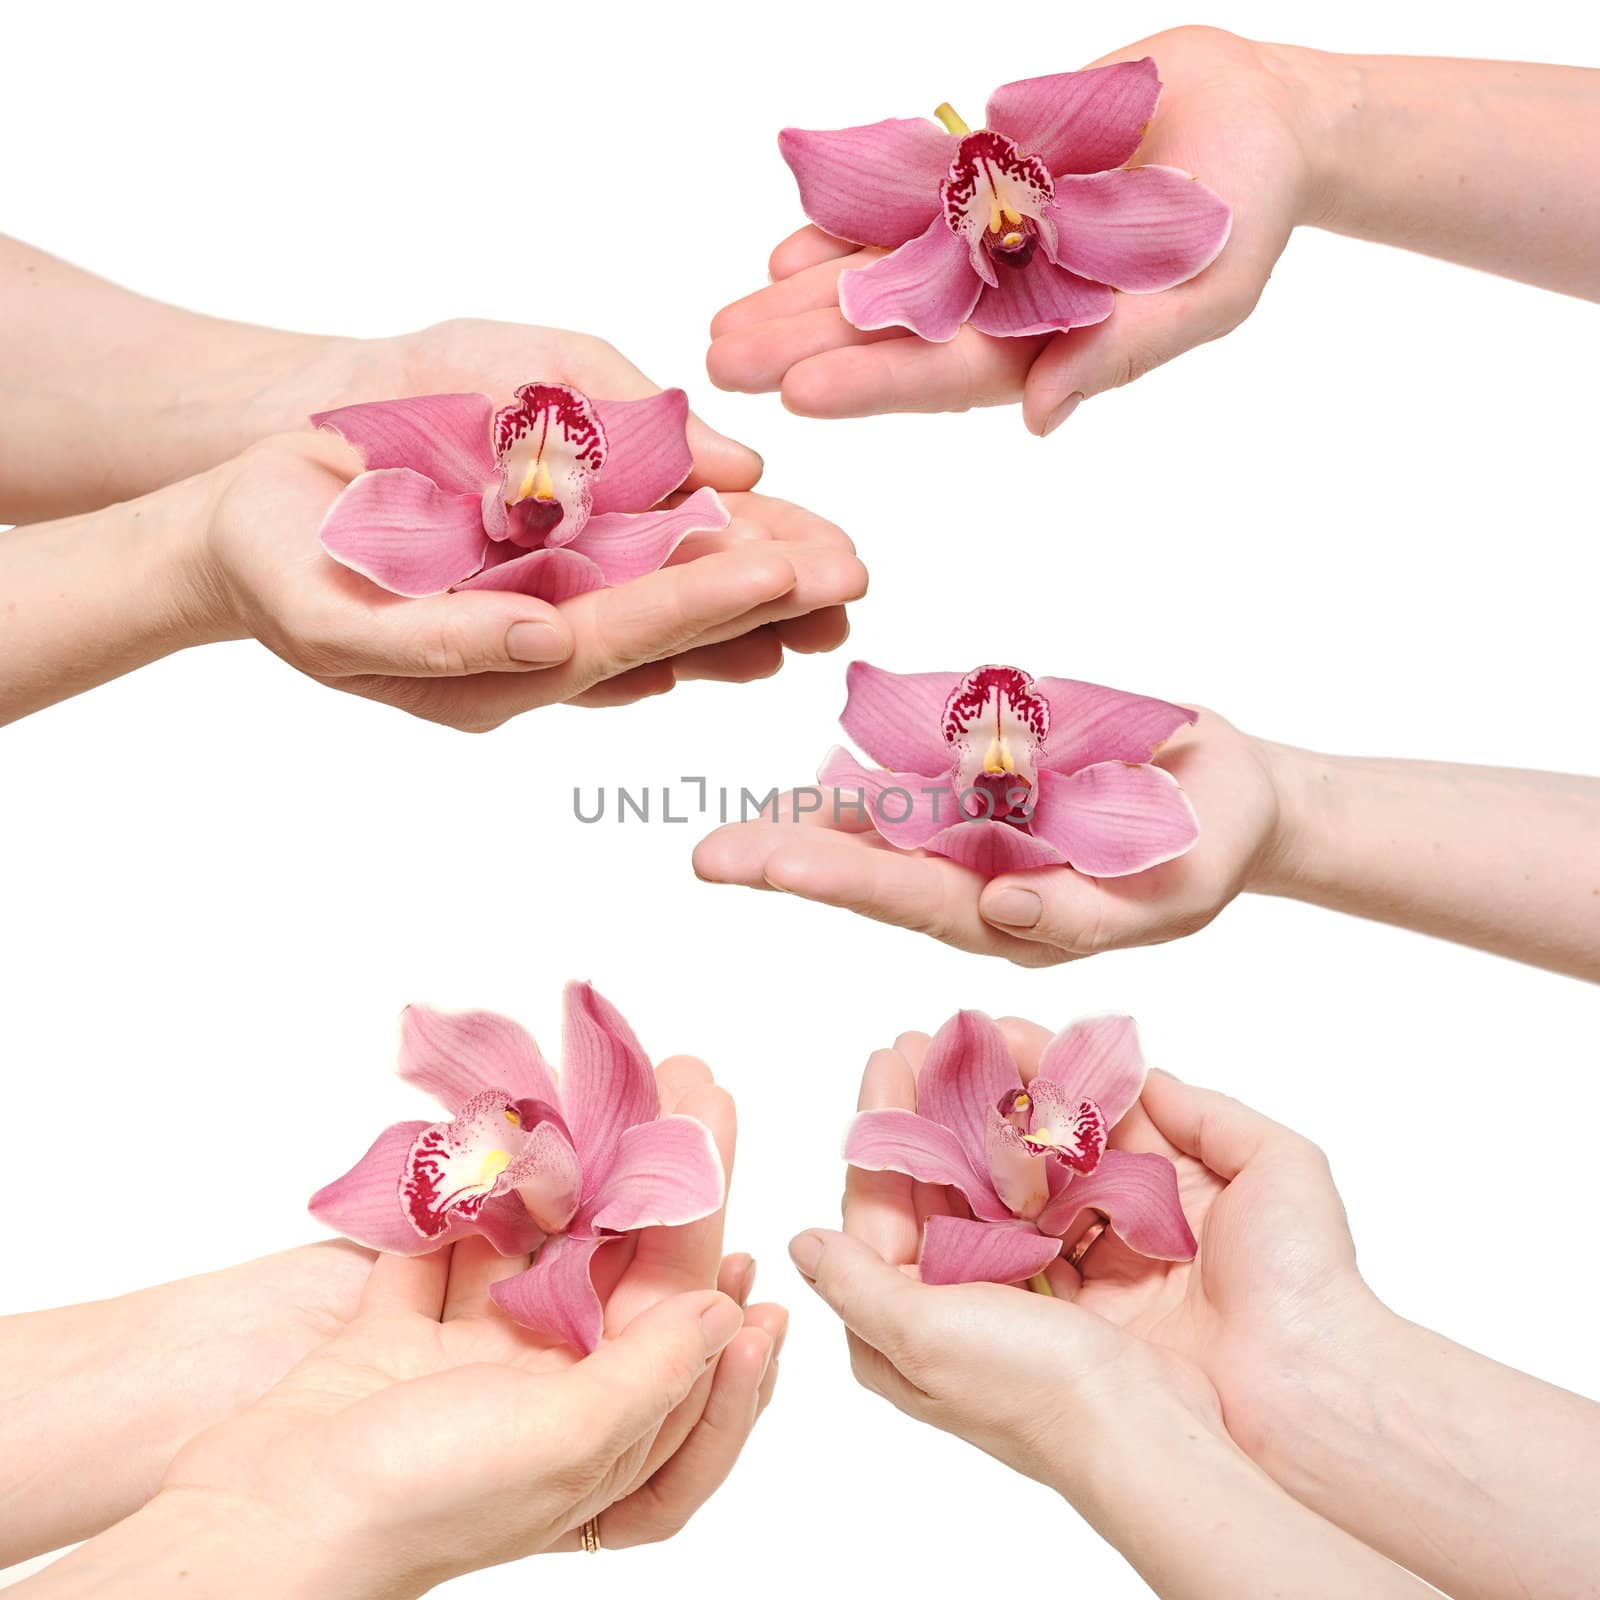 Hands and orchid over isolated white background.each one is a separate picture